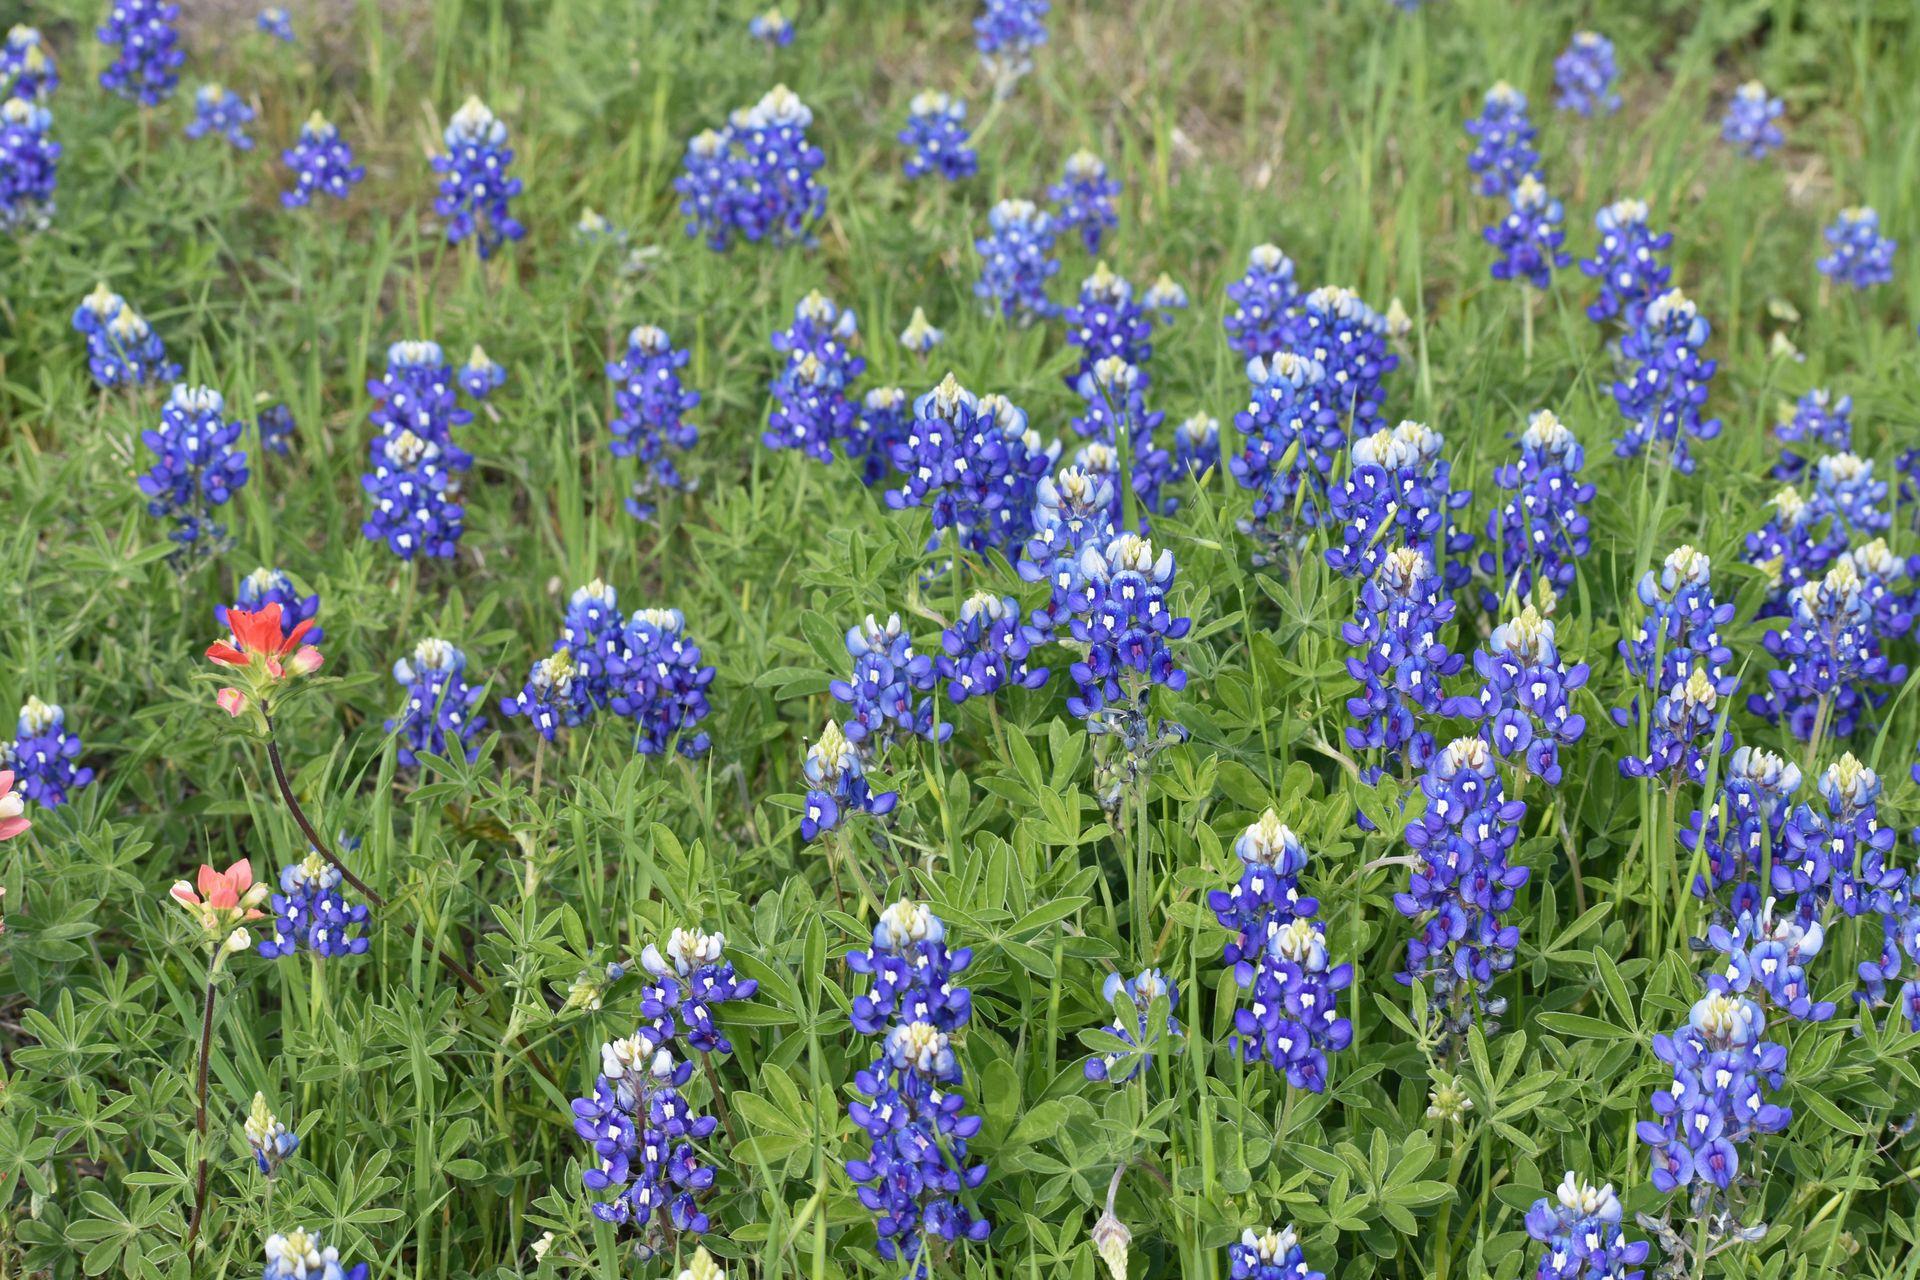 A close up photo of a view of bluebonnet flowers. There are a couple of red flowers in the corner.